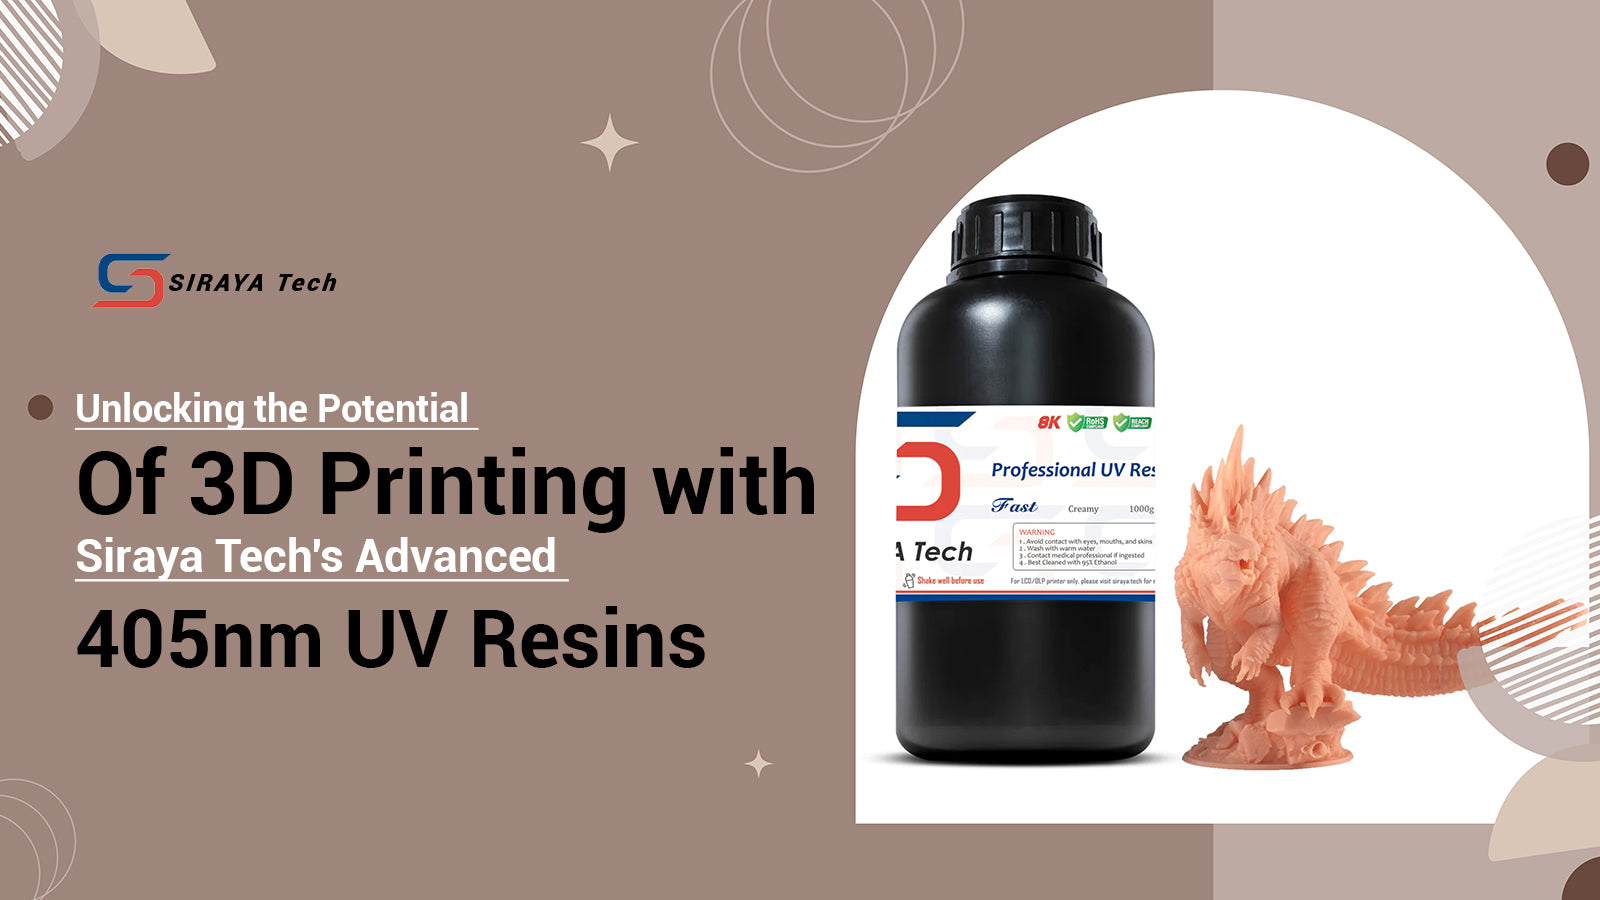 Unlocking the Potential of 3D Printing with Siraya Tech's Advanced 405nm UV Resins